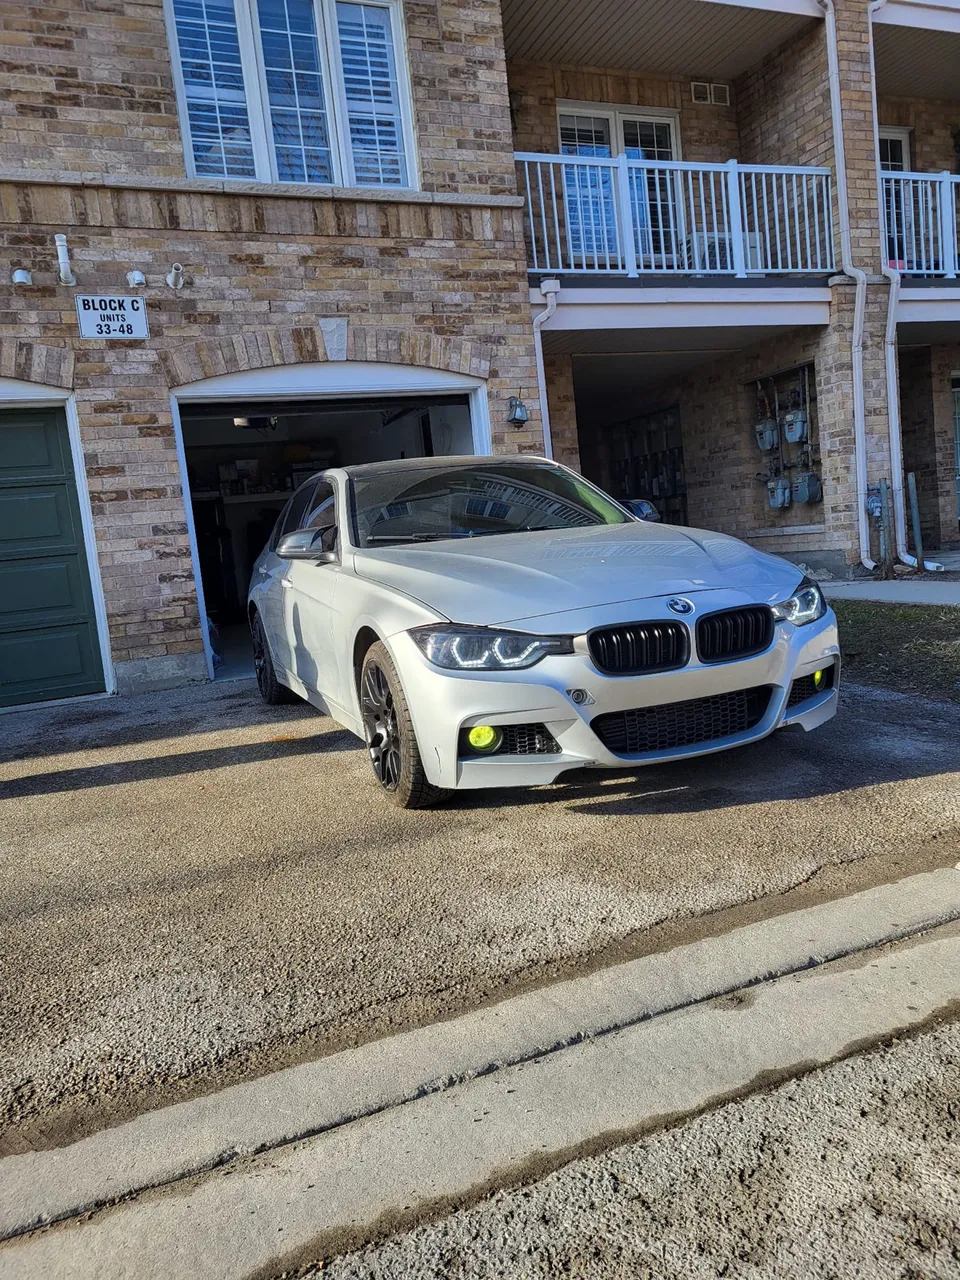 2014 BMW 320i in great condition!!